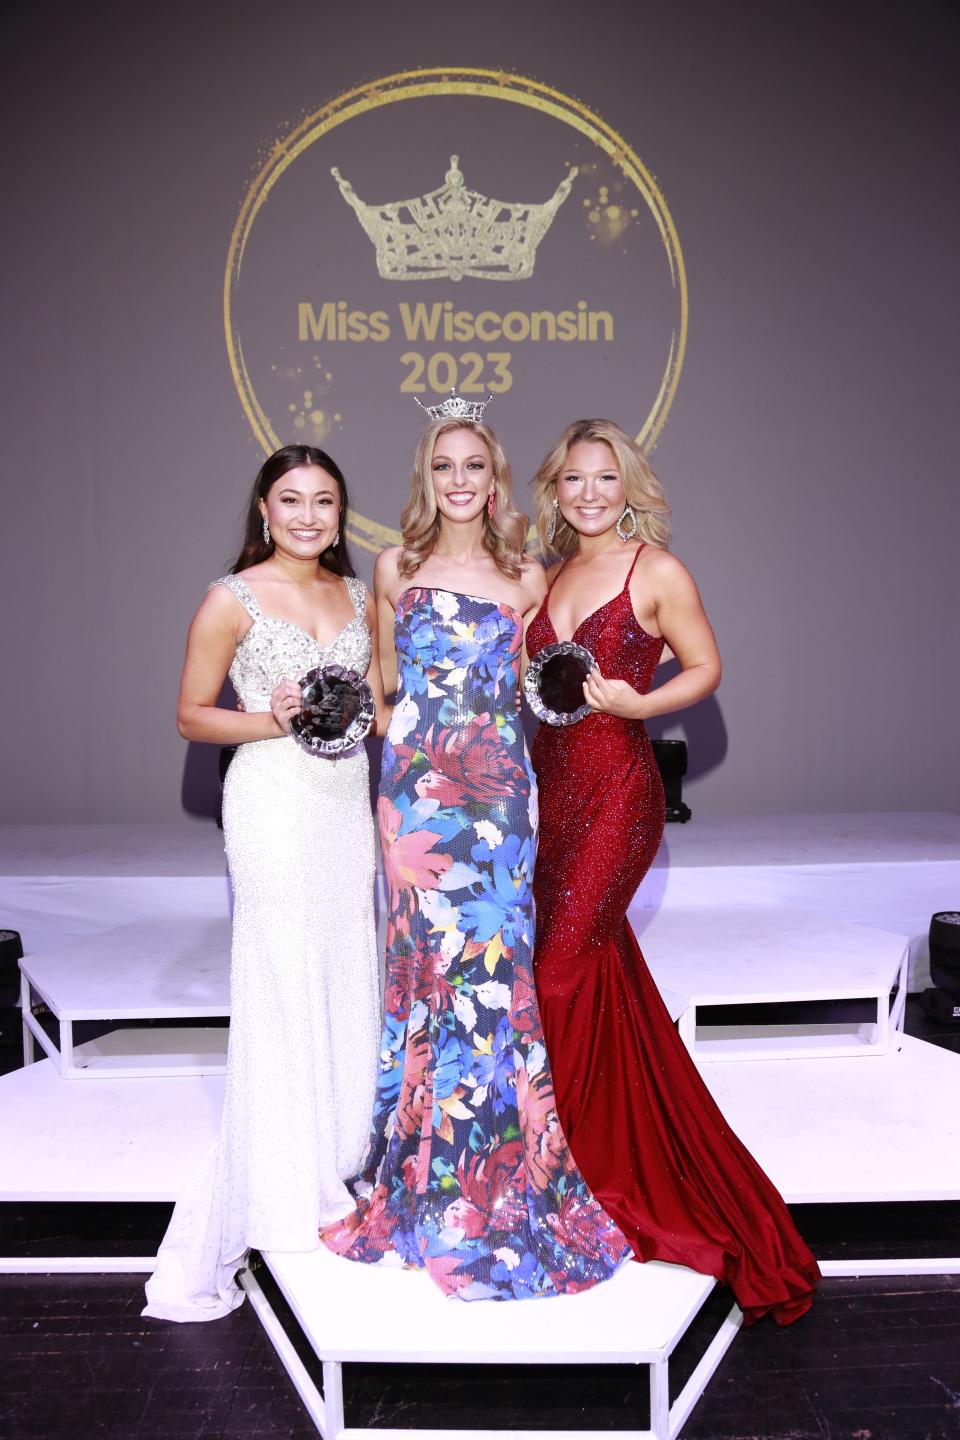 Miss South Central Lila Szyryj (left) captured the Talent Award and Miss Madison Paige Eide (right) won the Evening Wear preliminary award at the Miss Wisconsin Competition June 21, 2023.